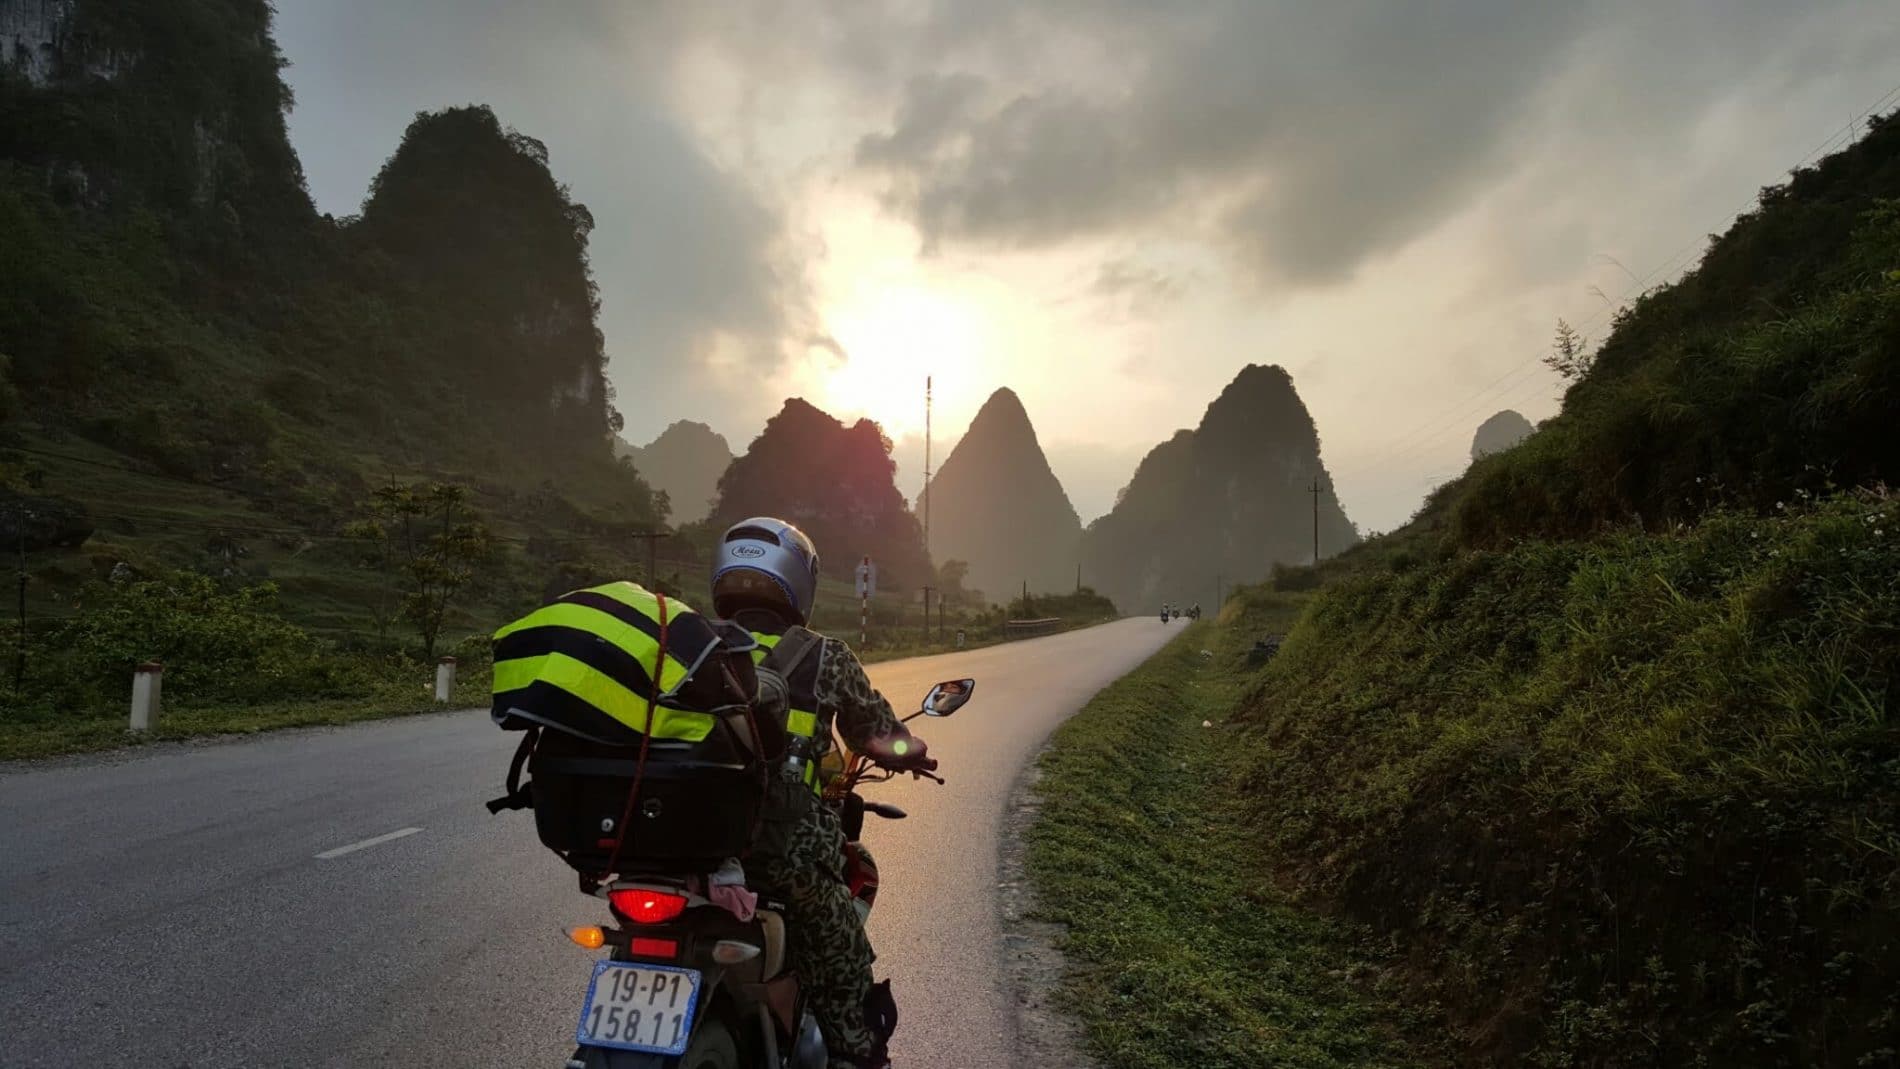 Exceptional Sapa Motorbike Tour Plus Homestay to Villages from Hanoi by Overnight Bus